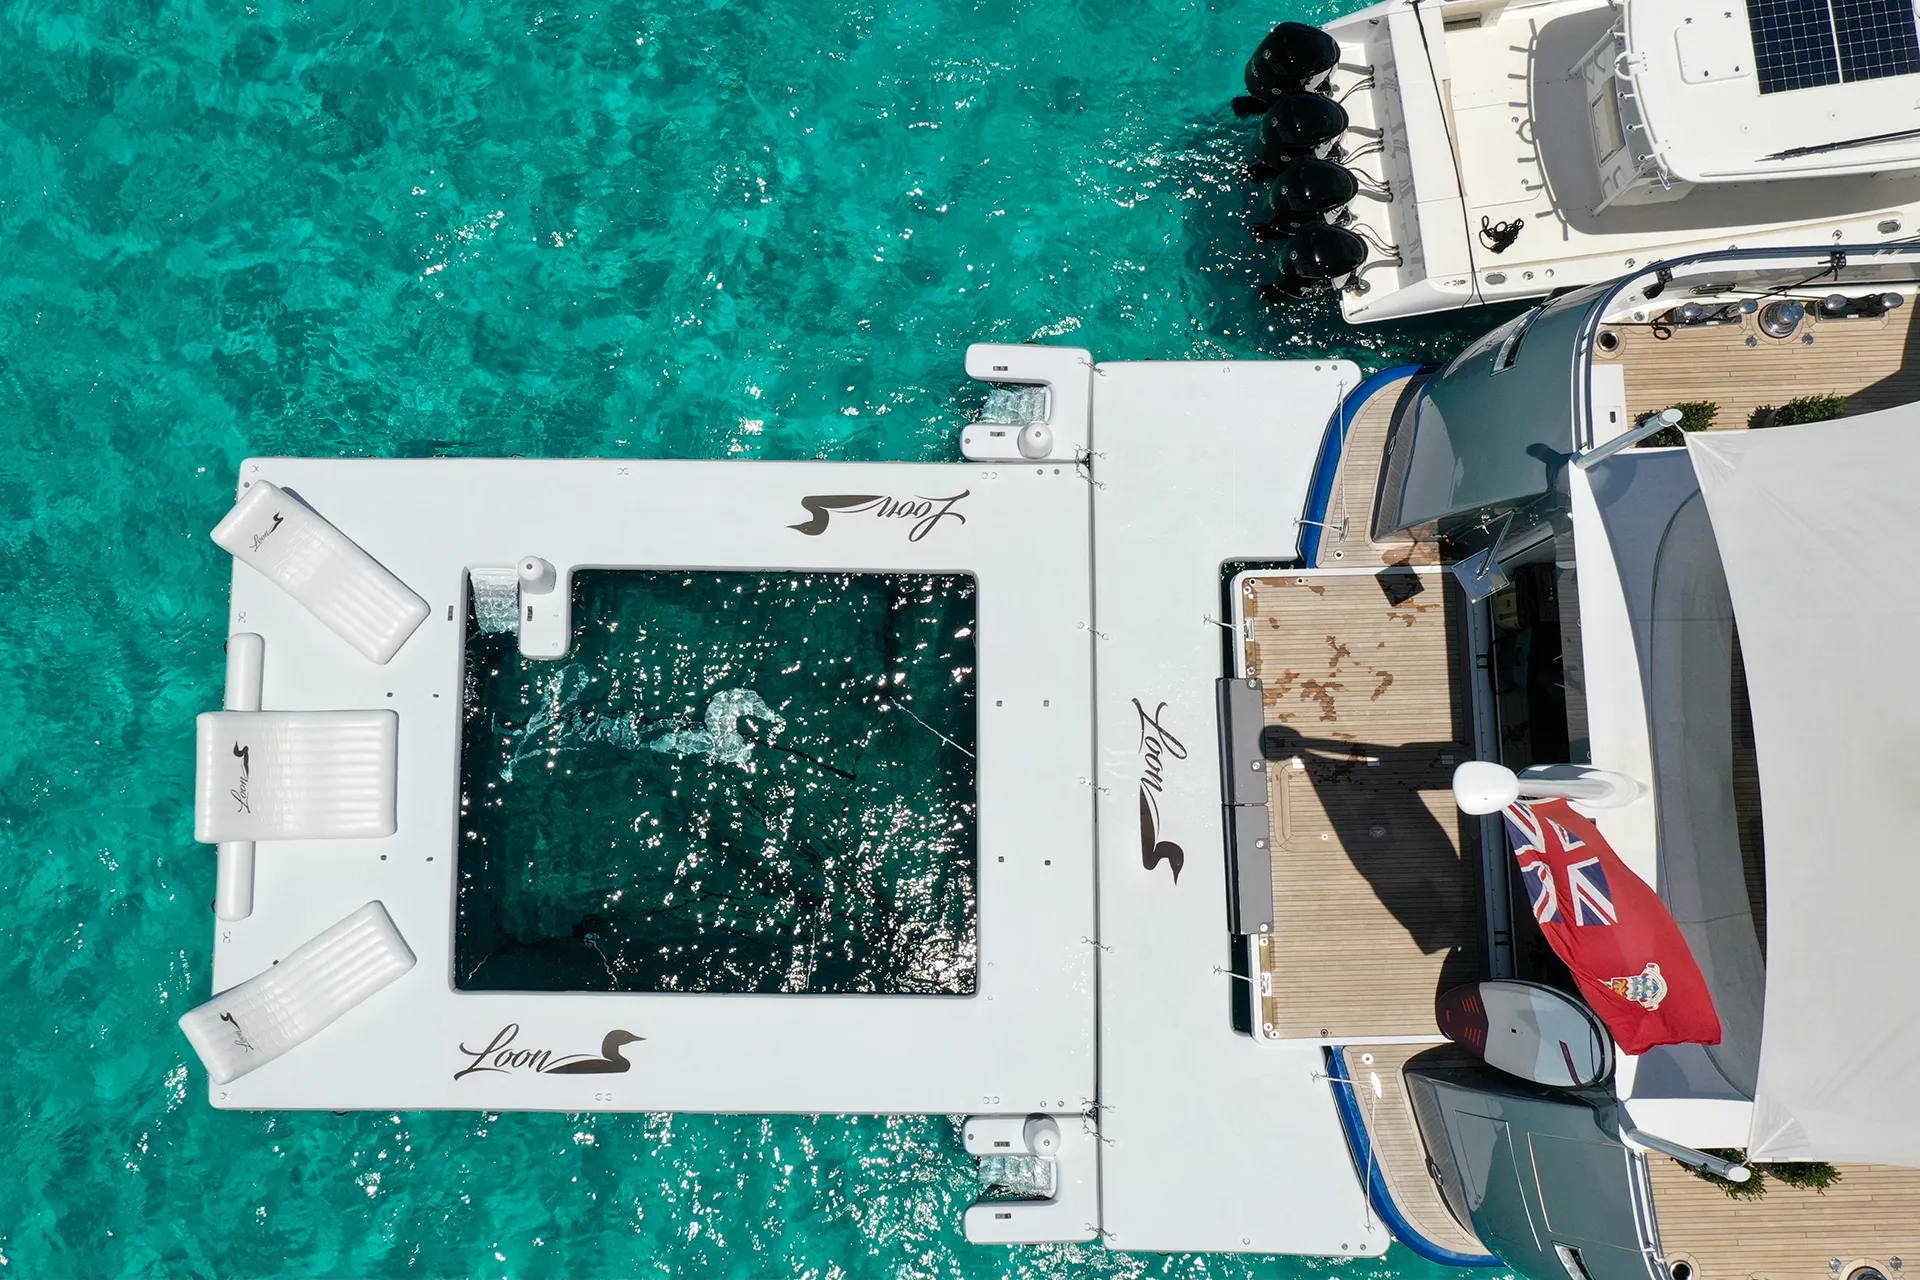 Charter superyacht Loon pool loungers birds eye view